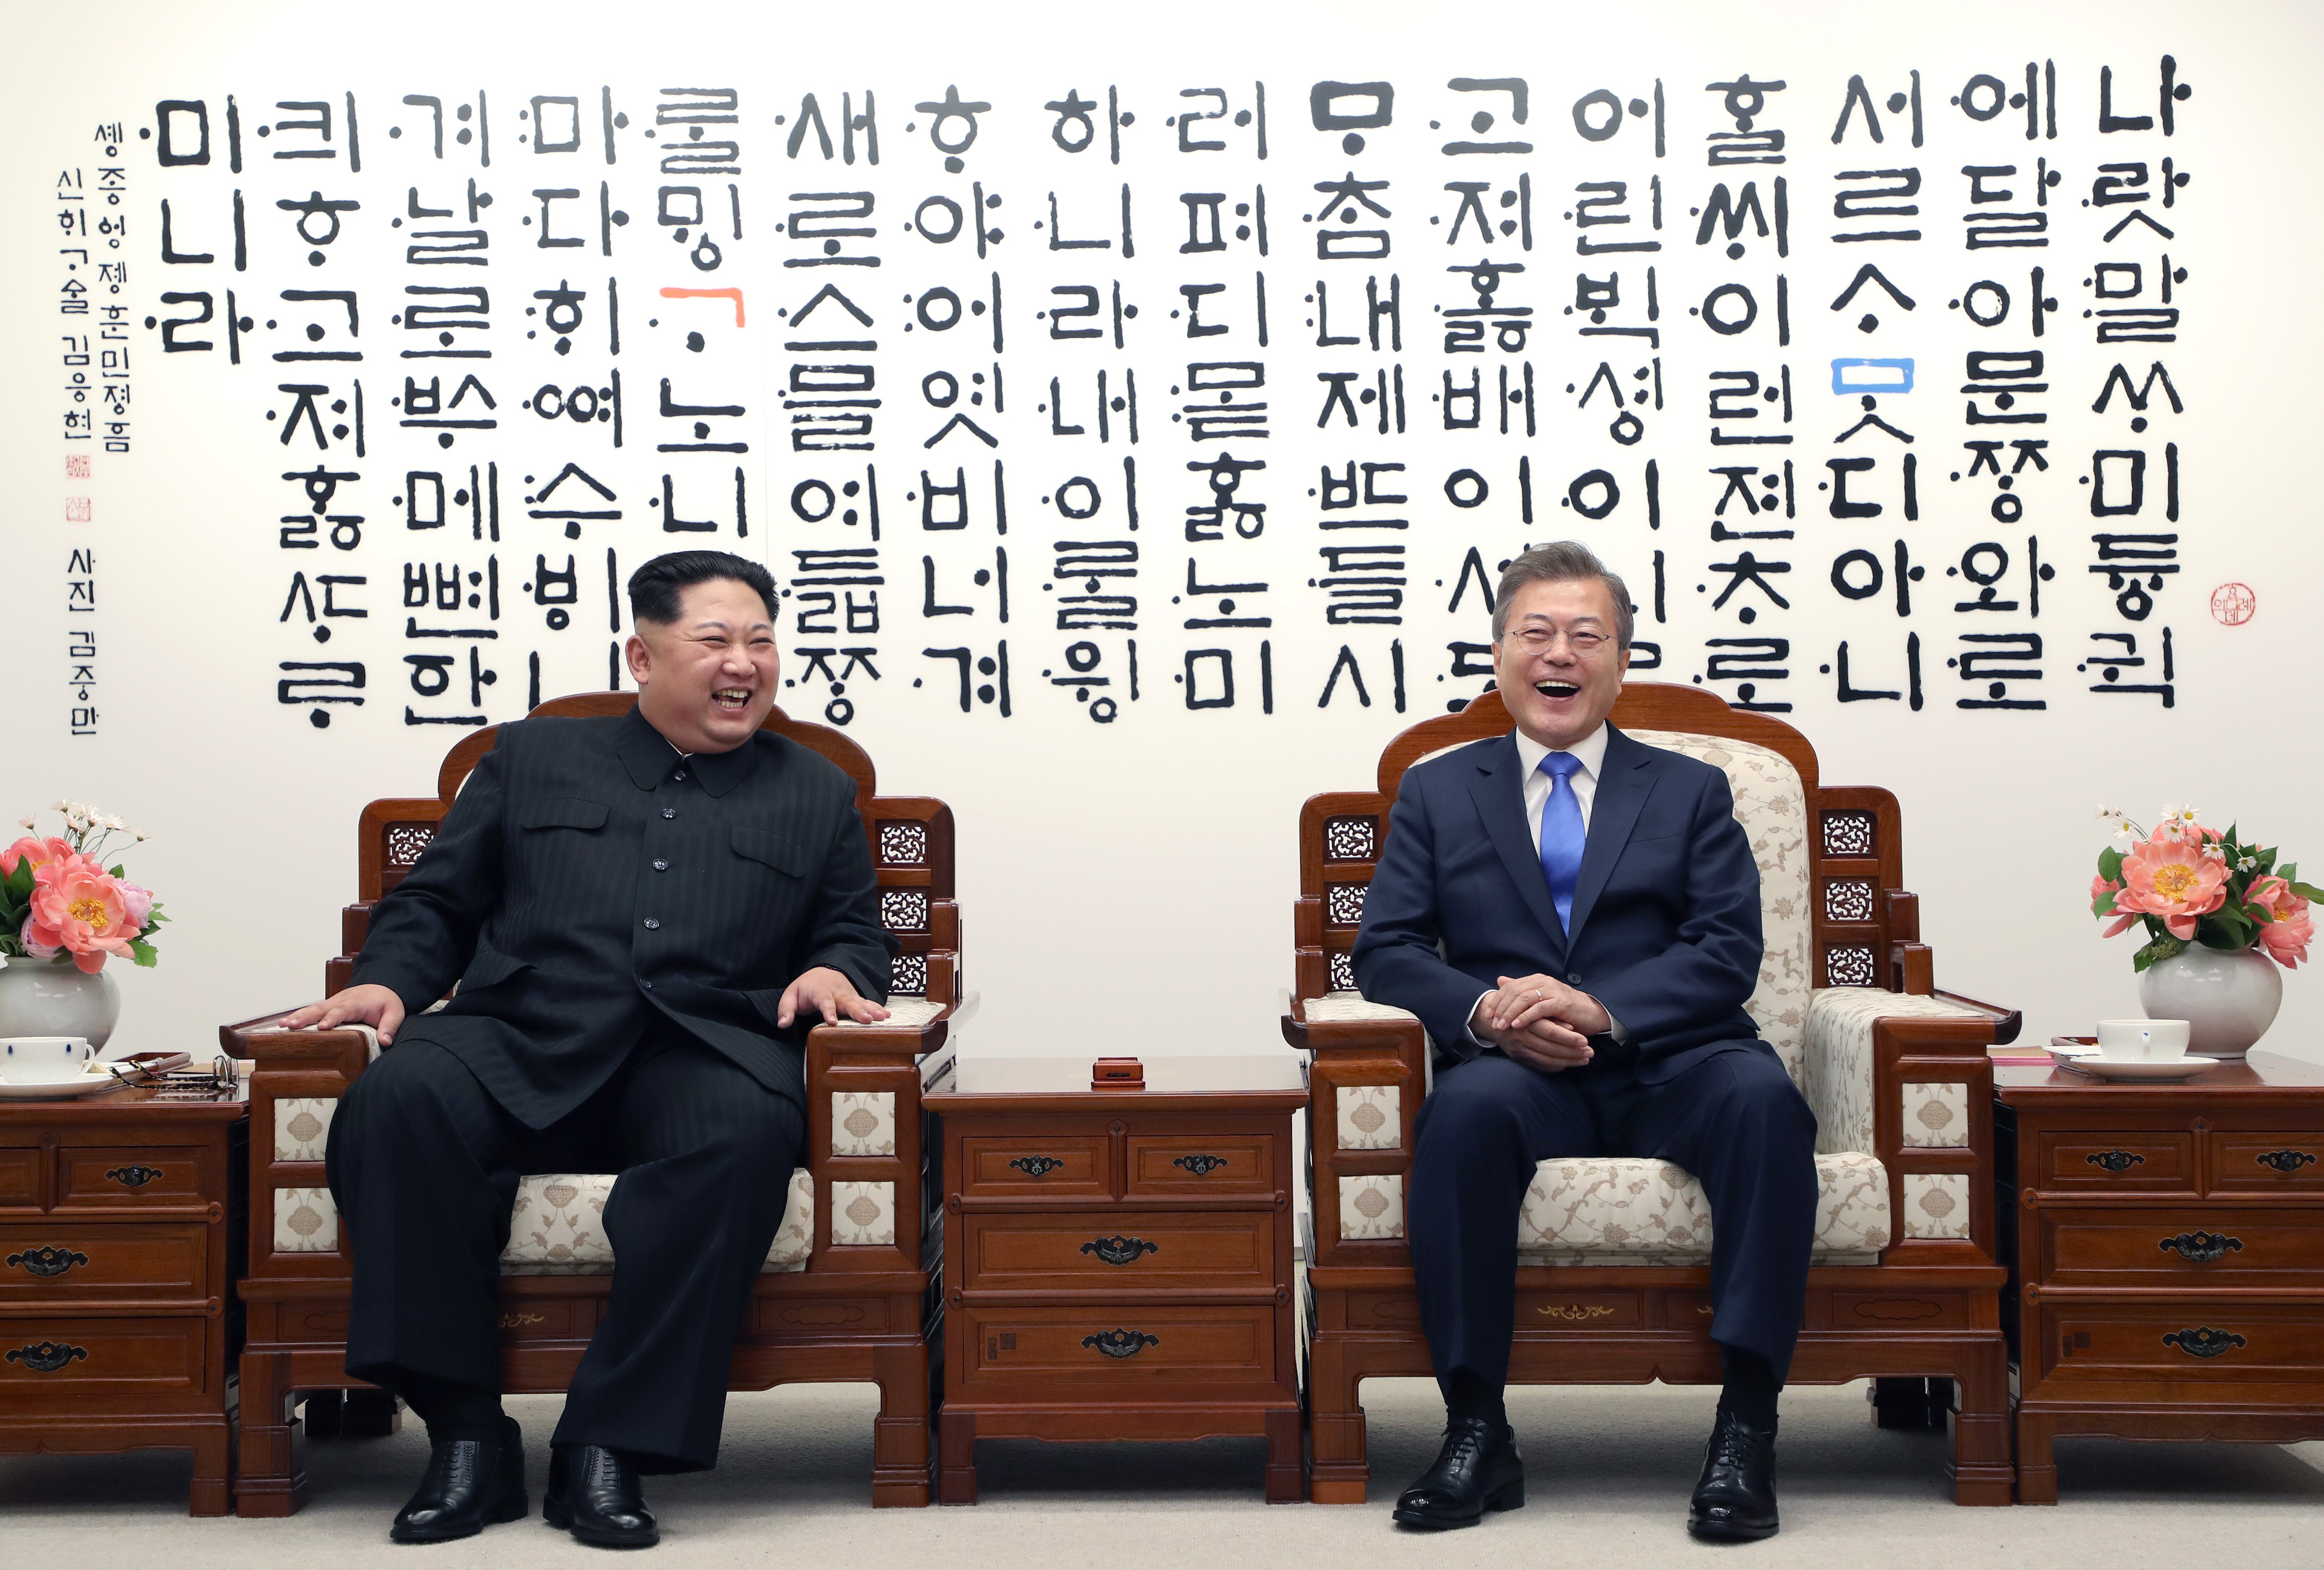 The inter-Korea summit brings the greatest chance for peace since the 1953 armistice. Grasping it requires more than Pyongyang dismantling WMDs. It needs Koreans to realise it is they alone who can determine their destiny